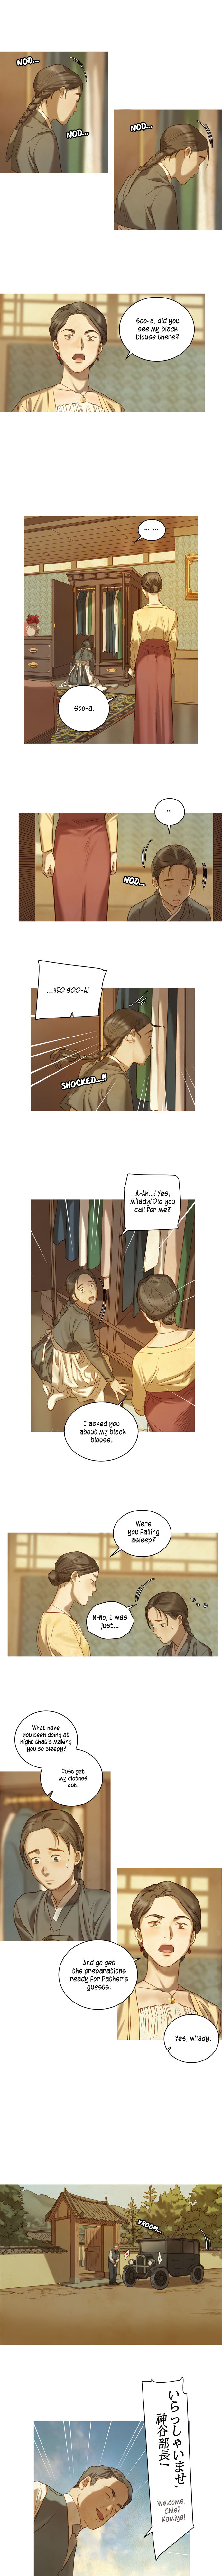 The Whale Star - The Gyeongseong Mermaid - Chapter 3 Page 8